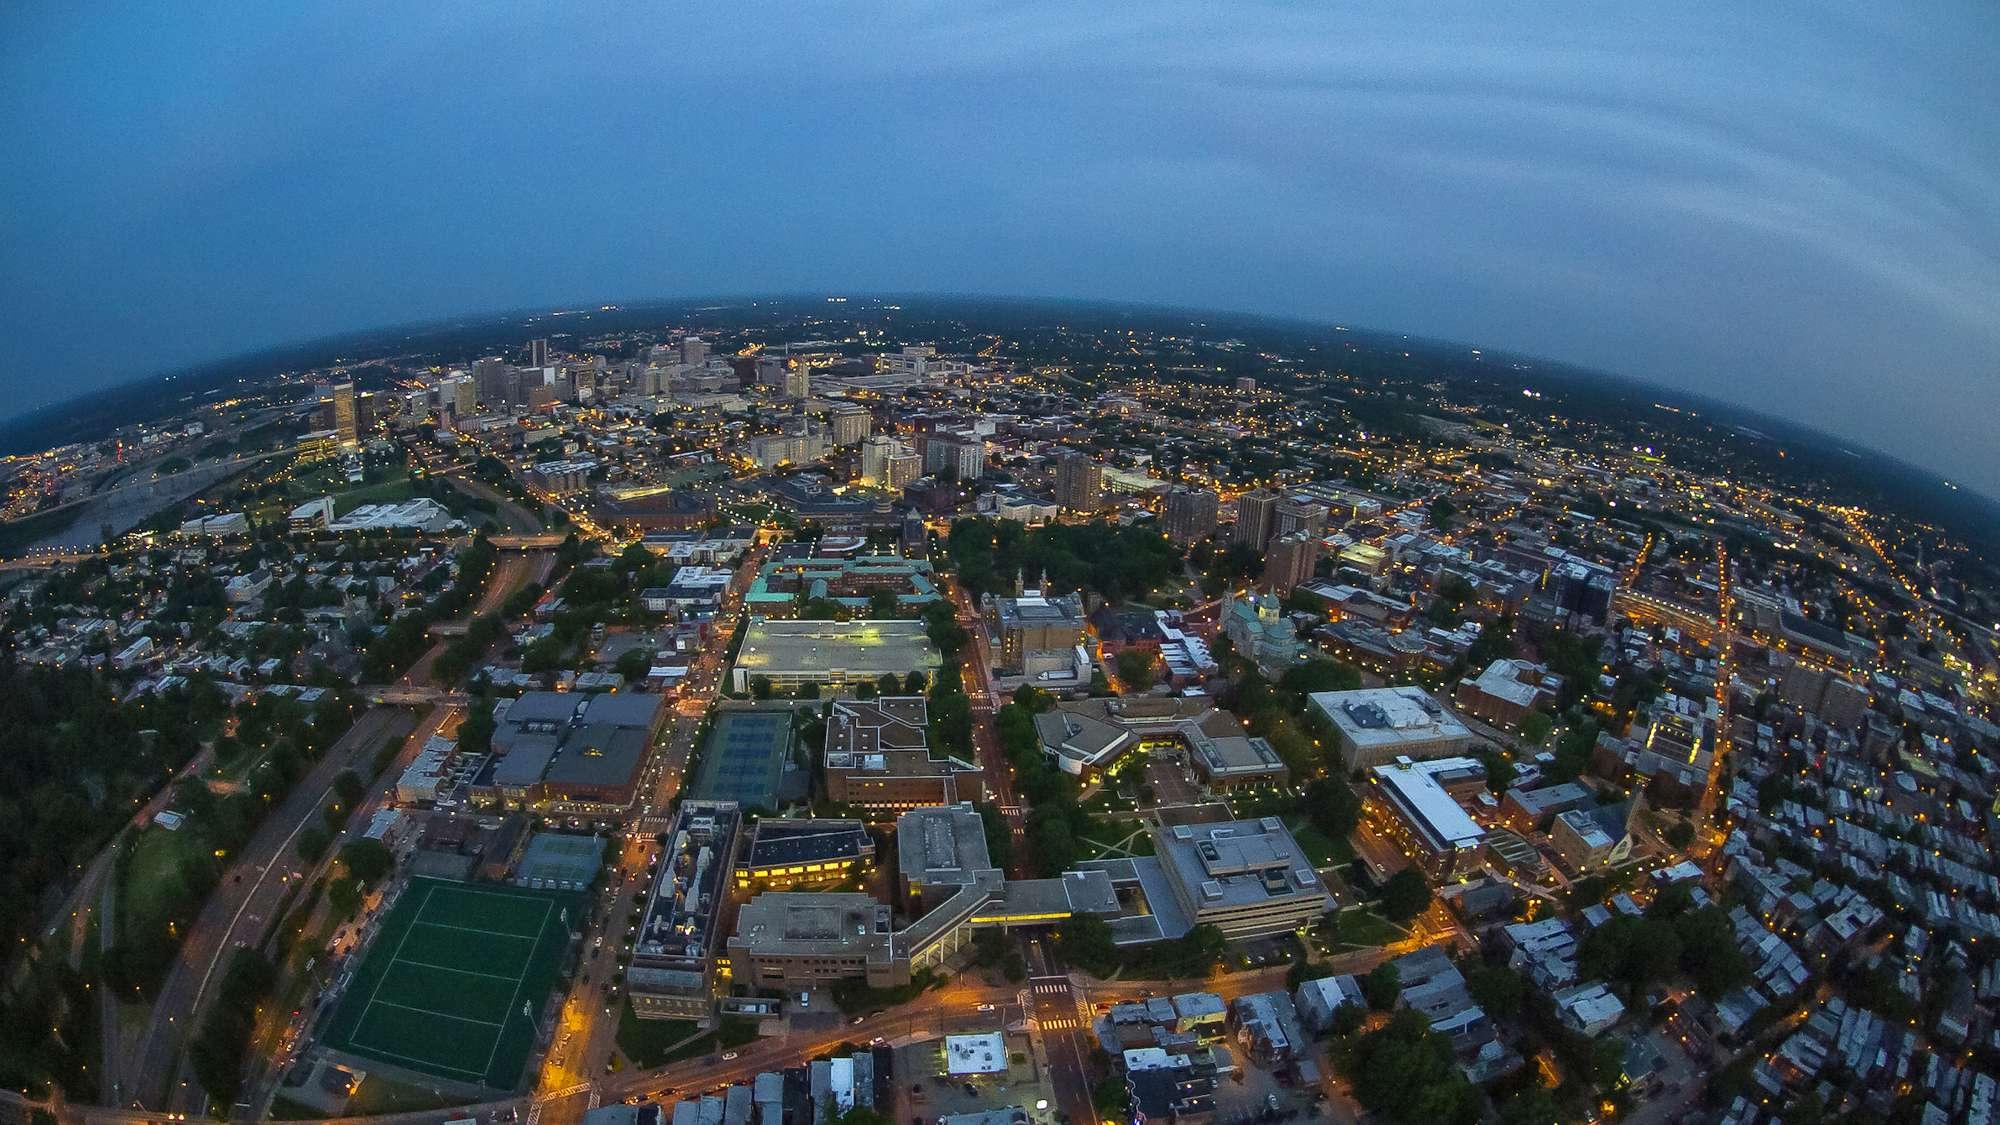 Photo showing an aerial view of VCU and the Richmond, Virginia city skyline at night